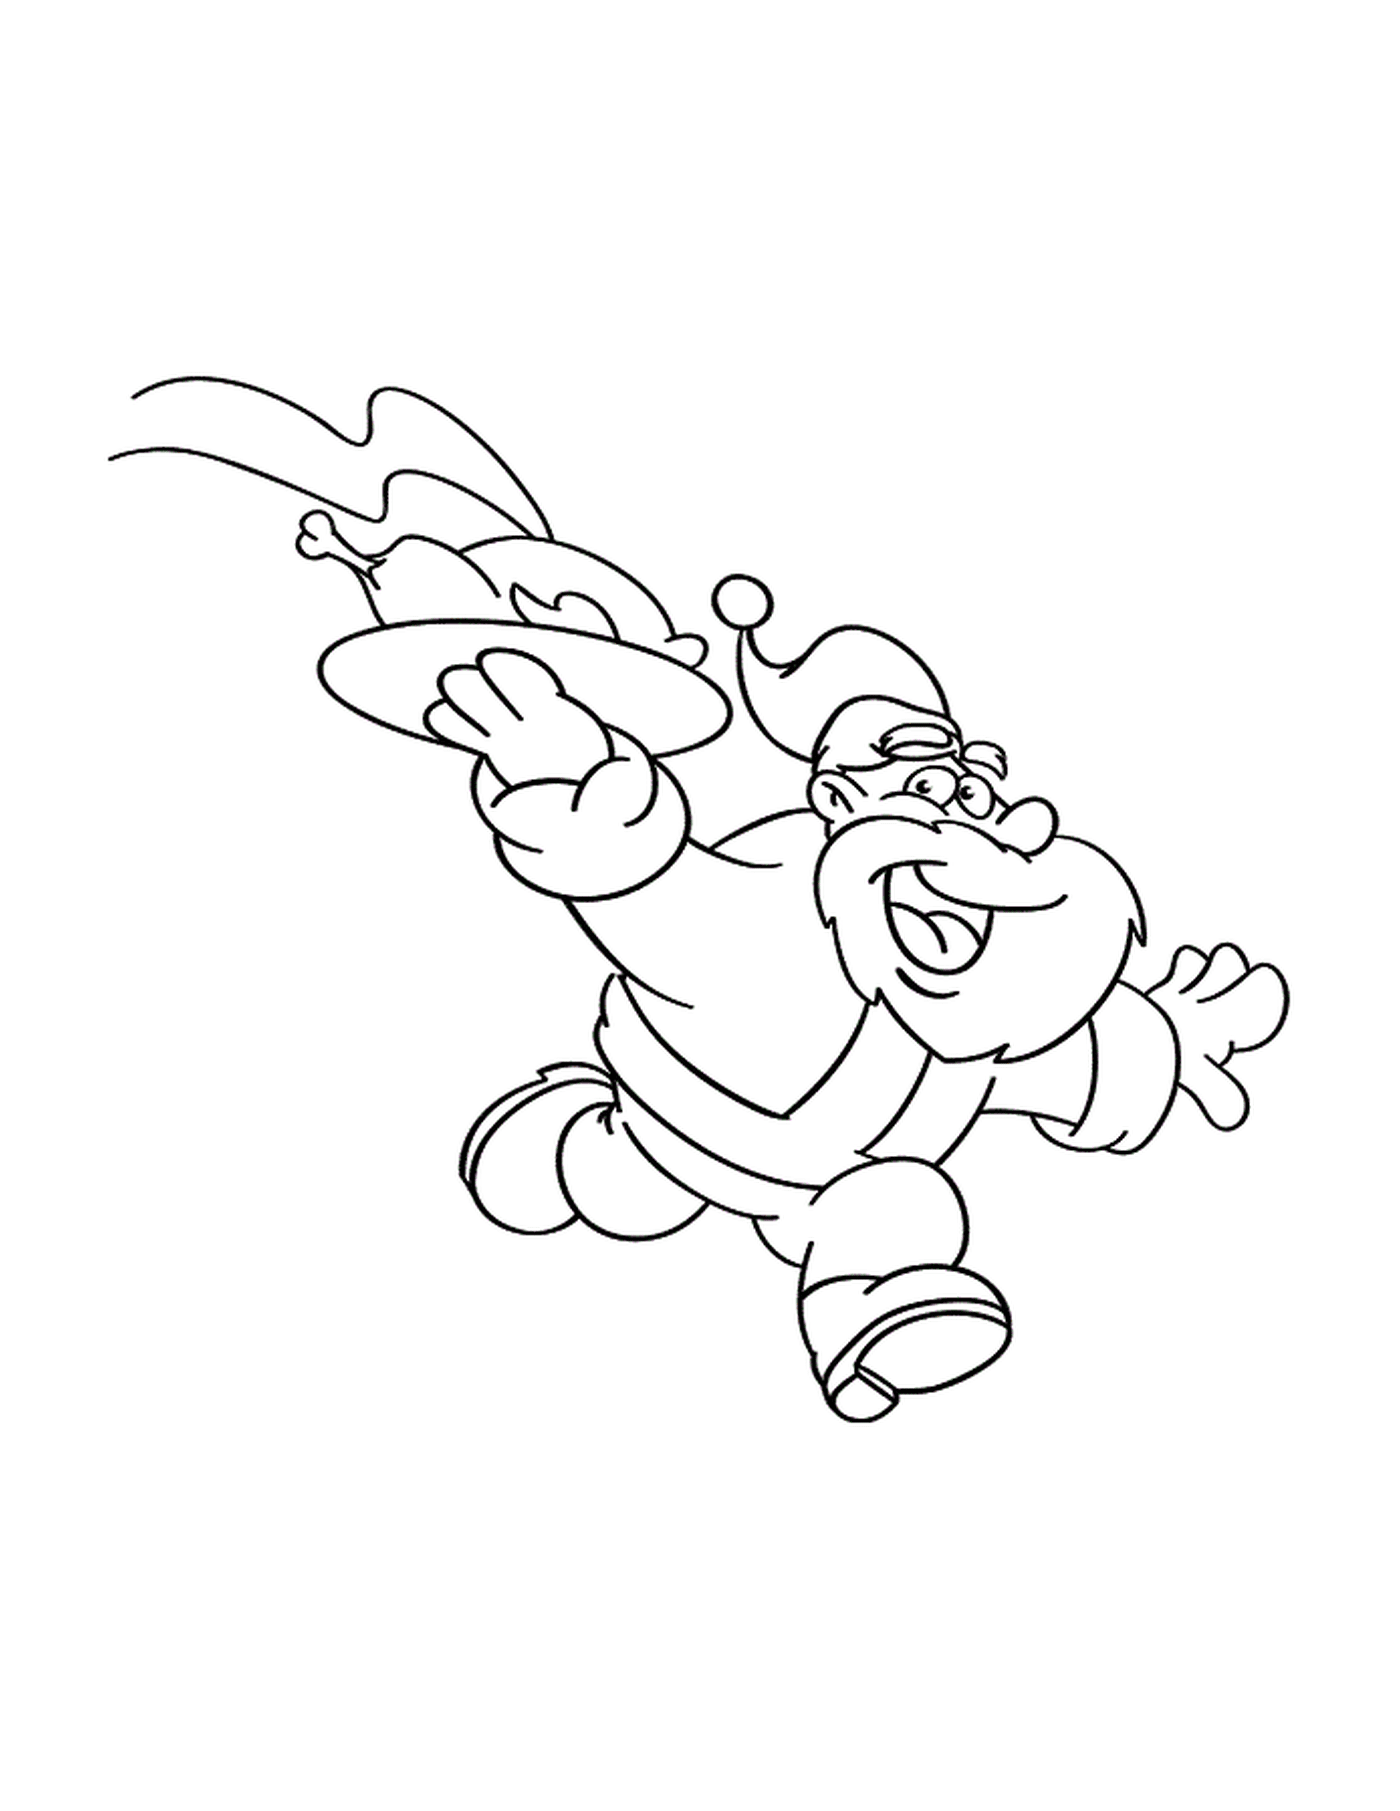  An old man with a buffoon hat running 